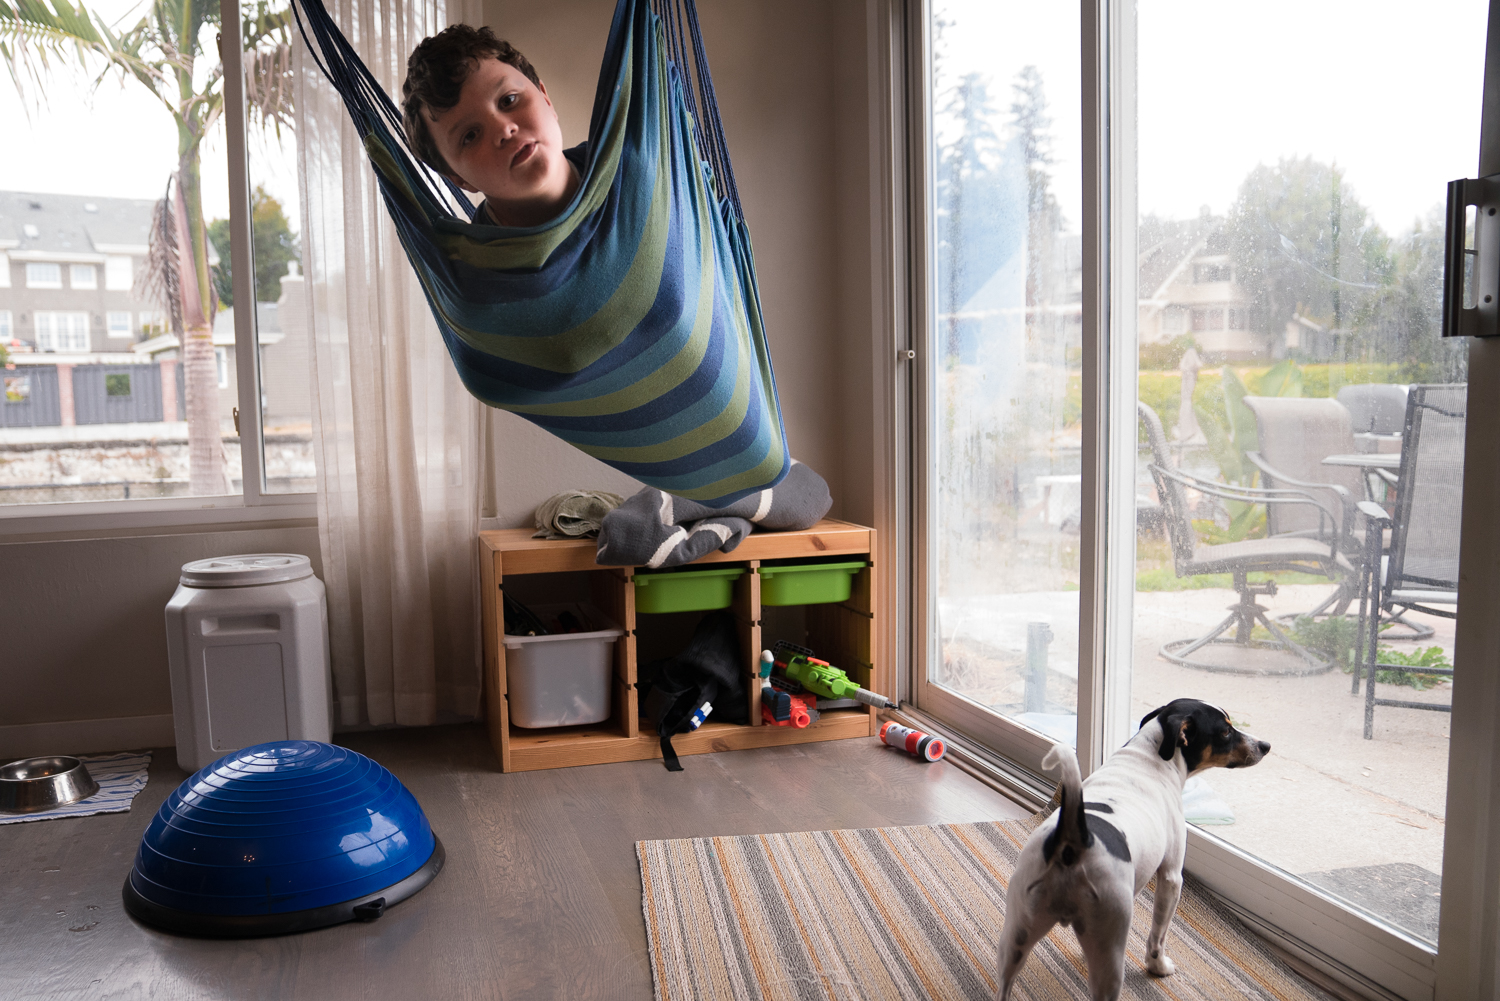 A boy lies in a hammock inside a room surrounded by window while a dog peers out the window.